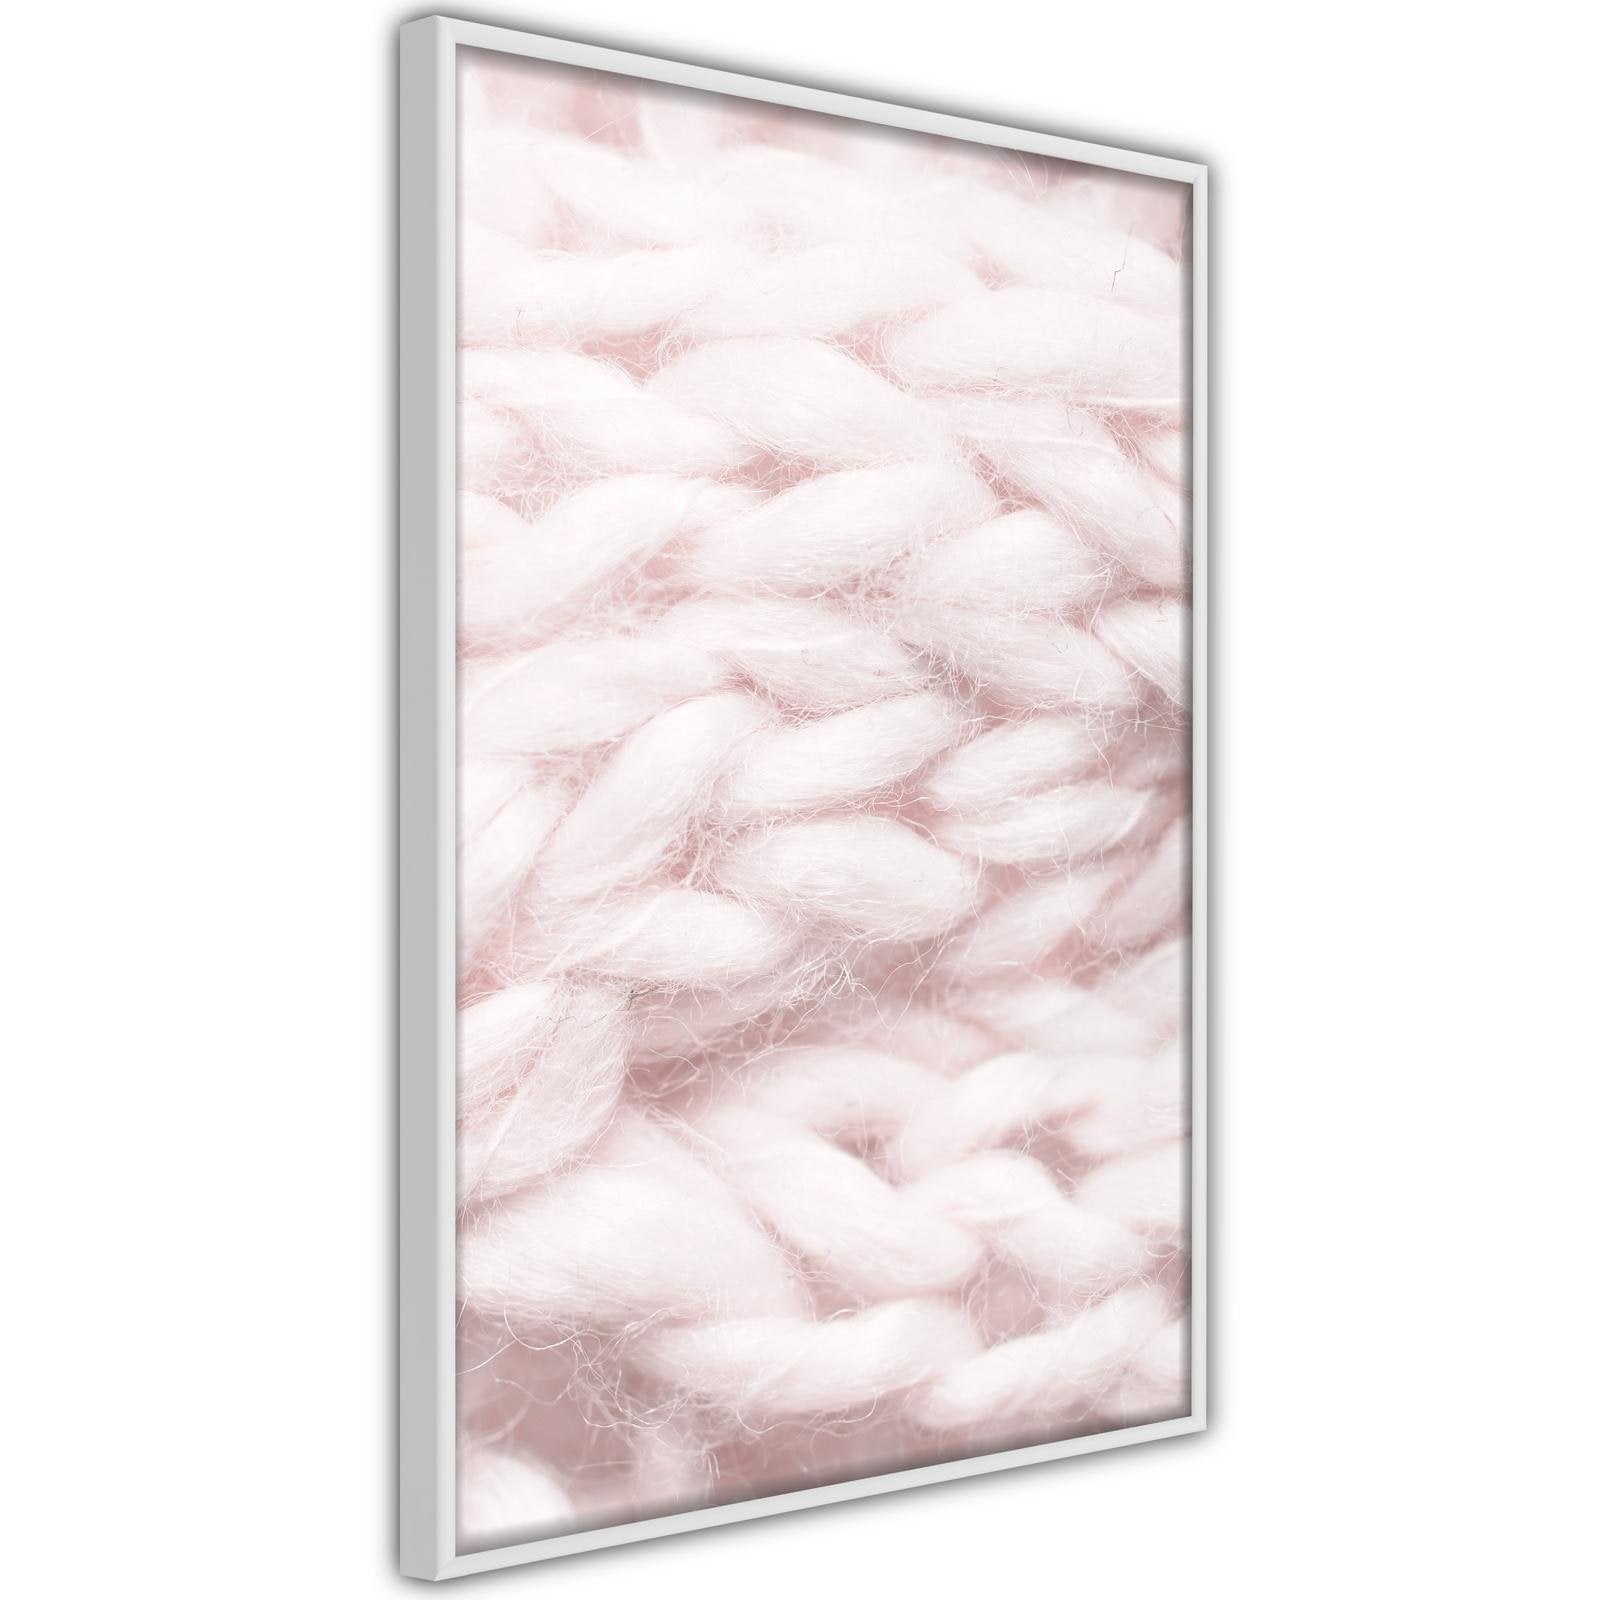 Inramad Poster / Tavla - Pale Pink Knit-Poster Inramad-Artgeist-peaceofhome.se